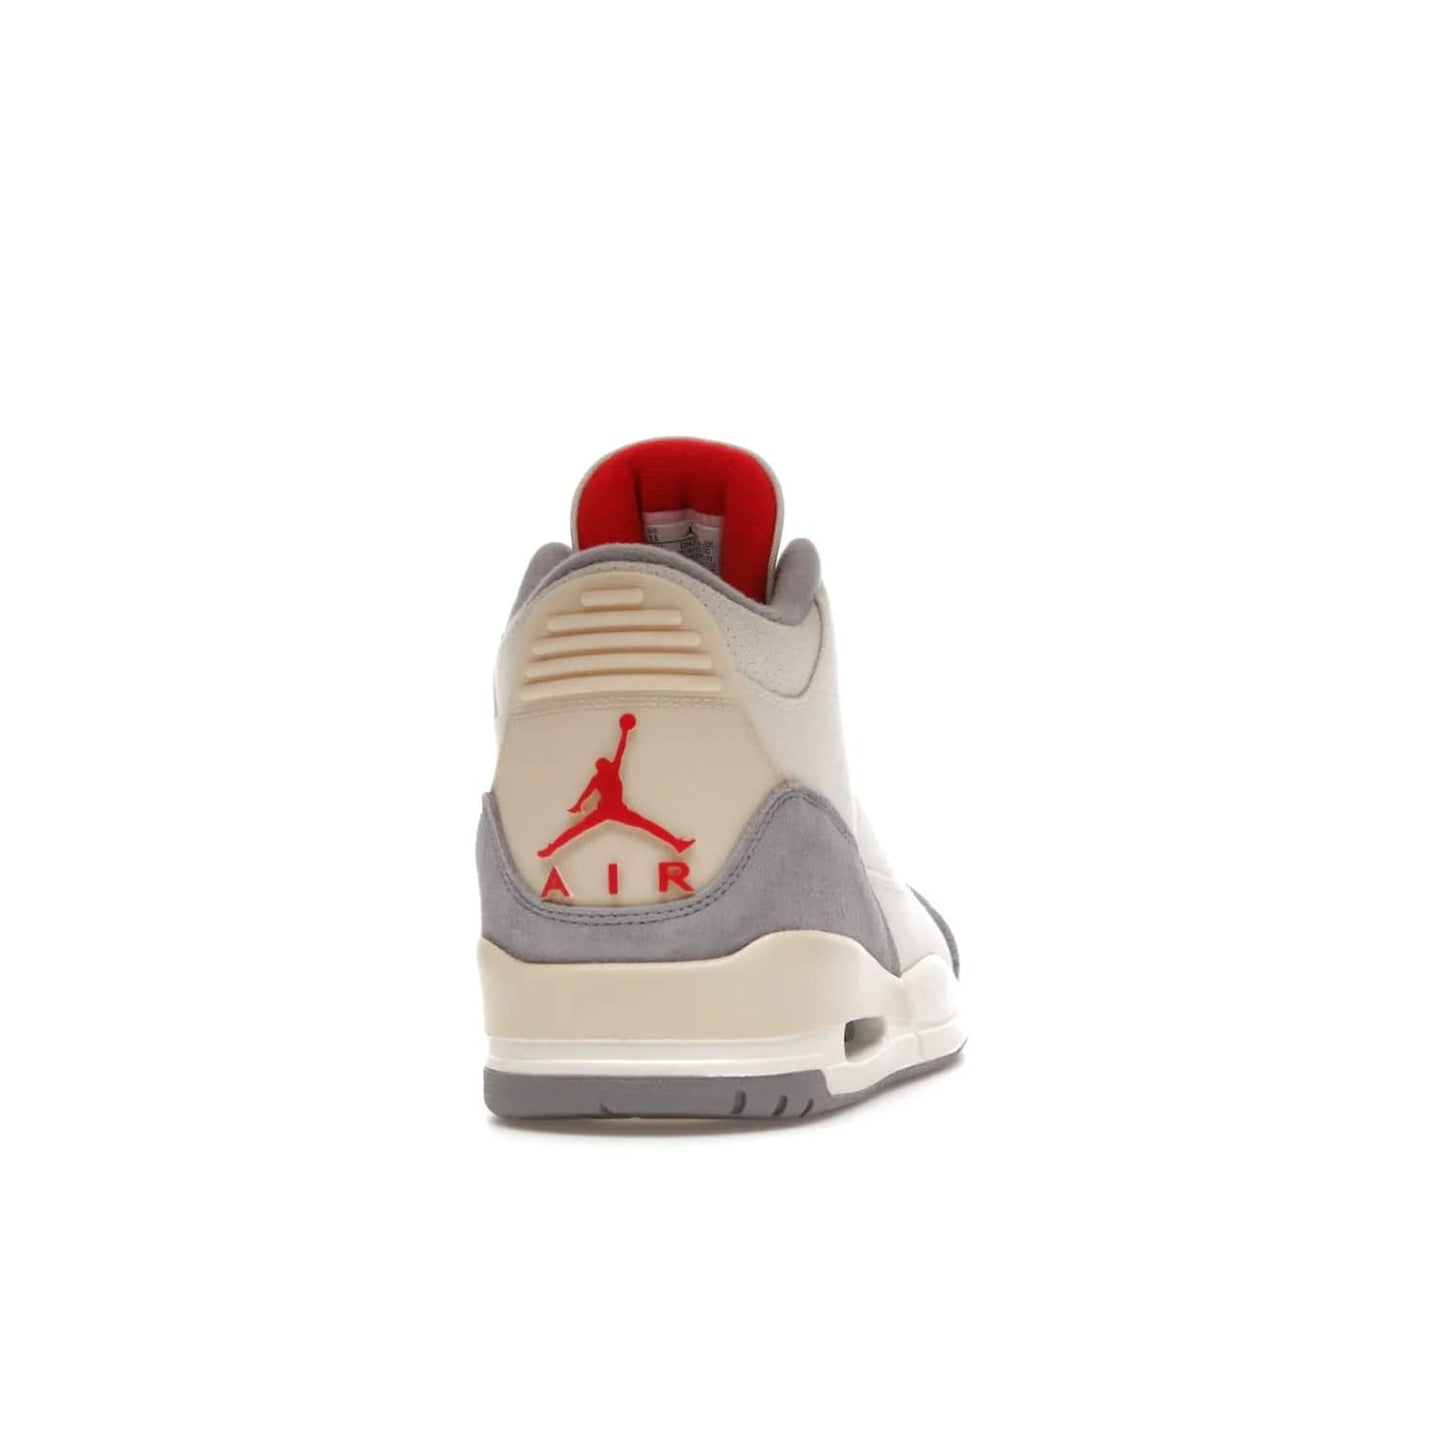 Jordan 3 Retro Muslin - Image 29 - Only at www.BallersClubKickz.com - Eye-catching Air Jordan 3 Retro Muslin in a neutral palette of grey, cream, and red. Featuring canvas upper, suede overlays and white/grey Air Max sole. Available in March 2022.